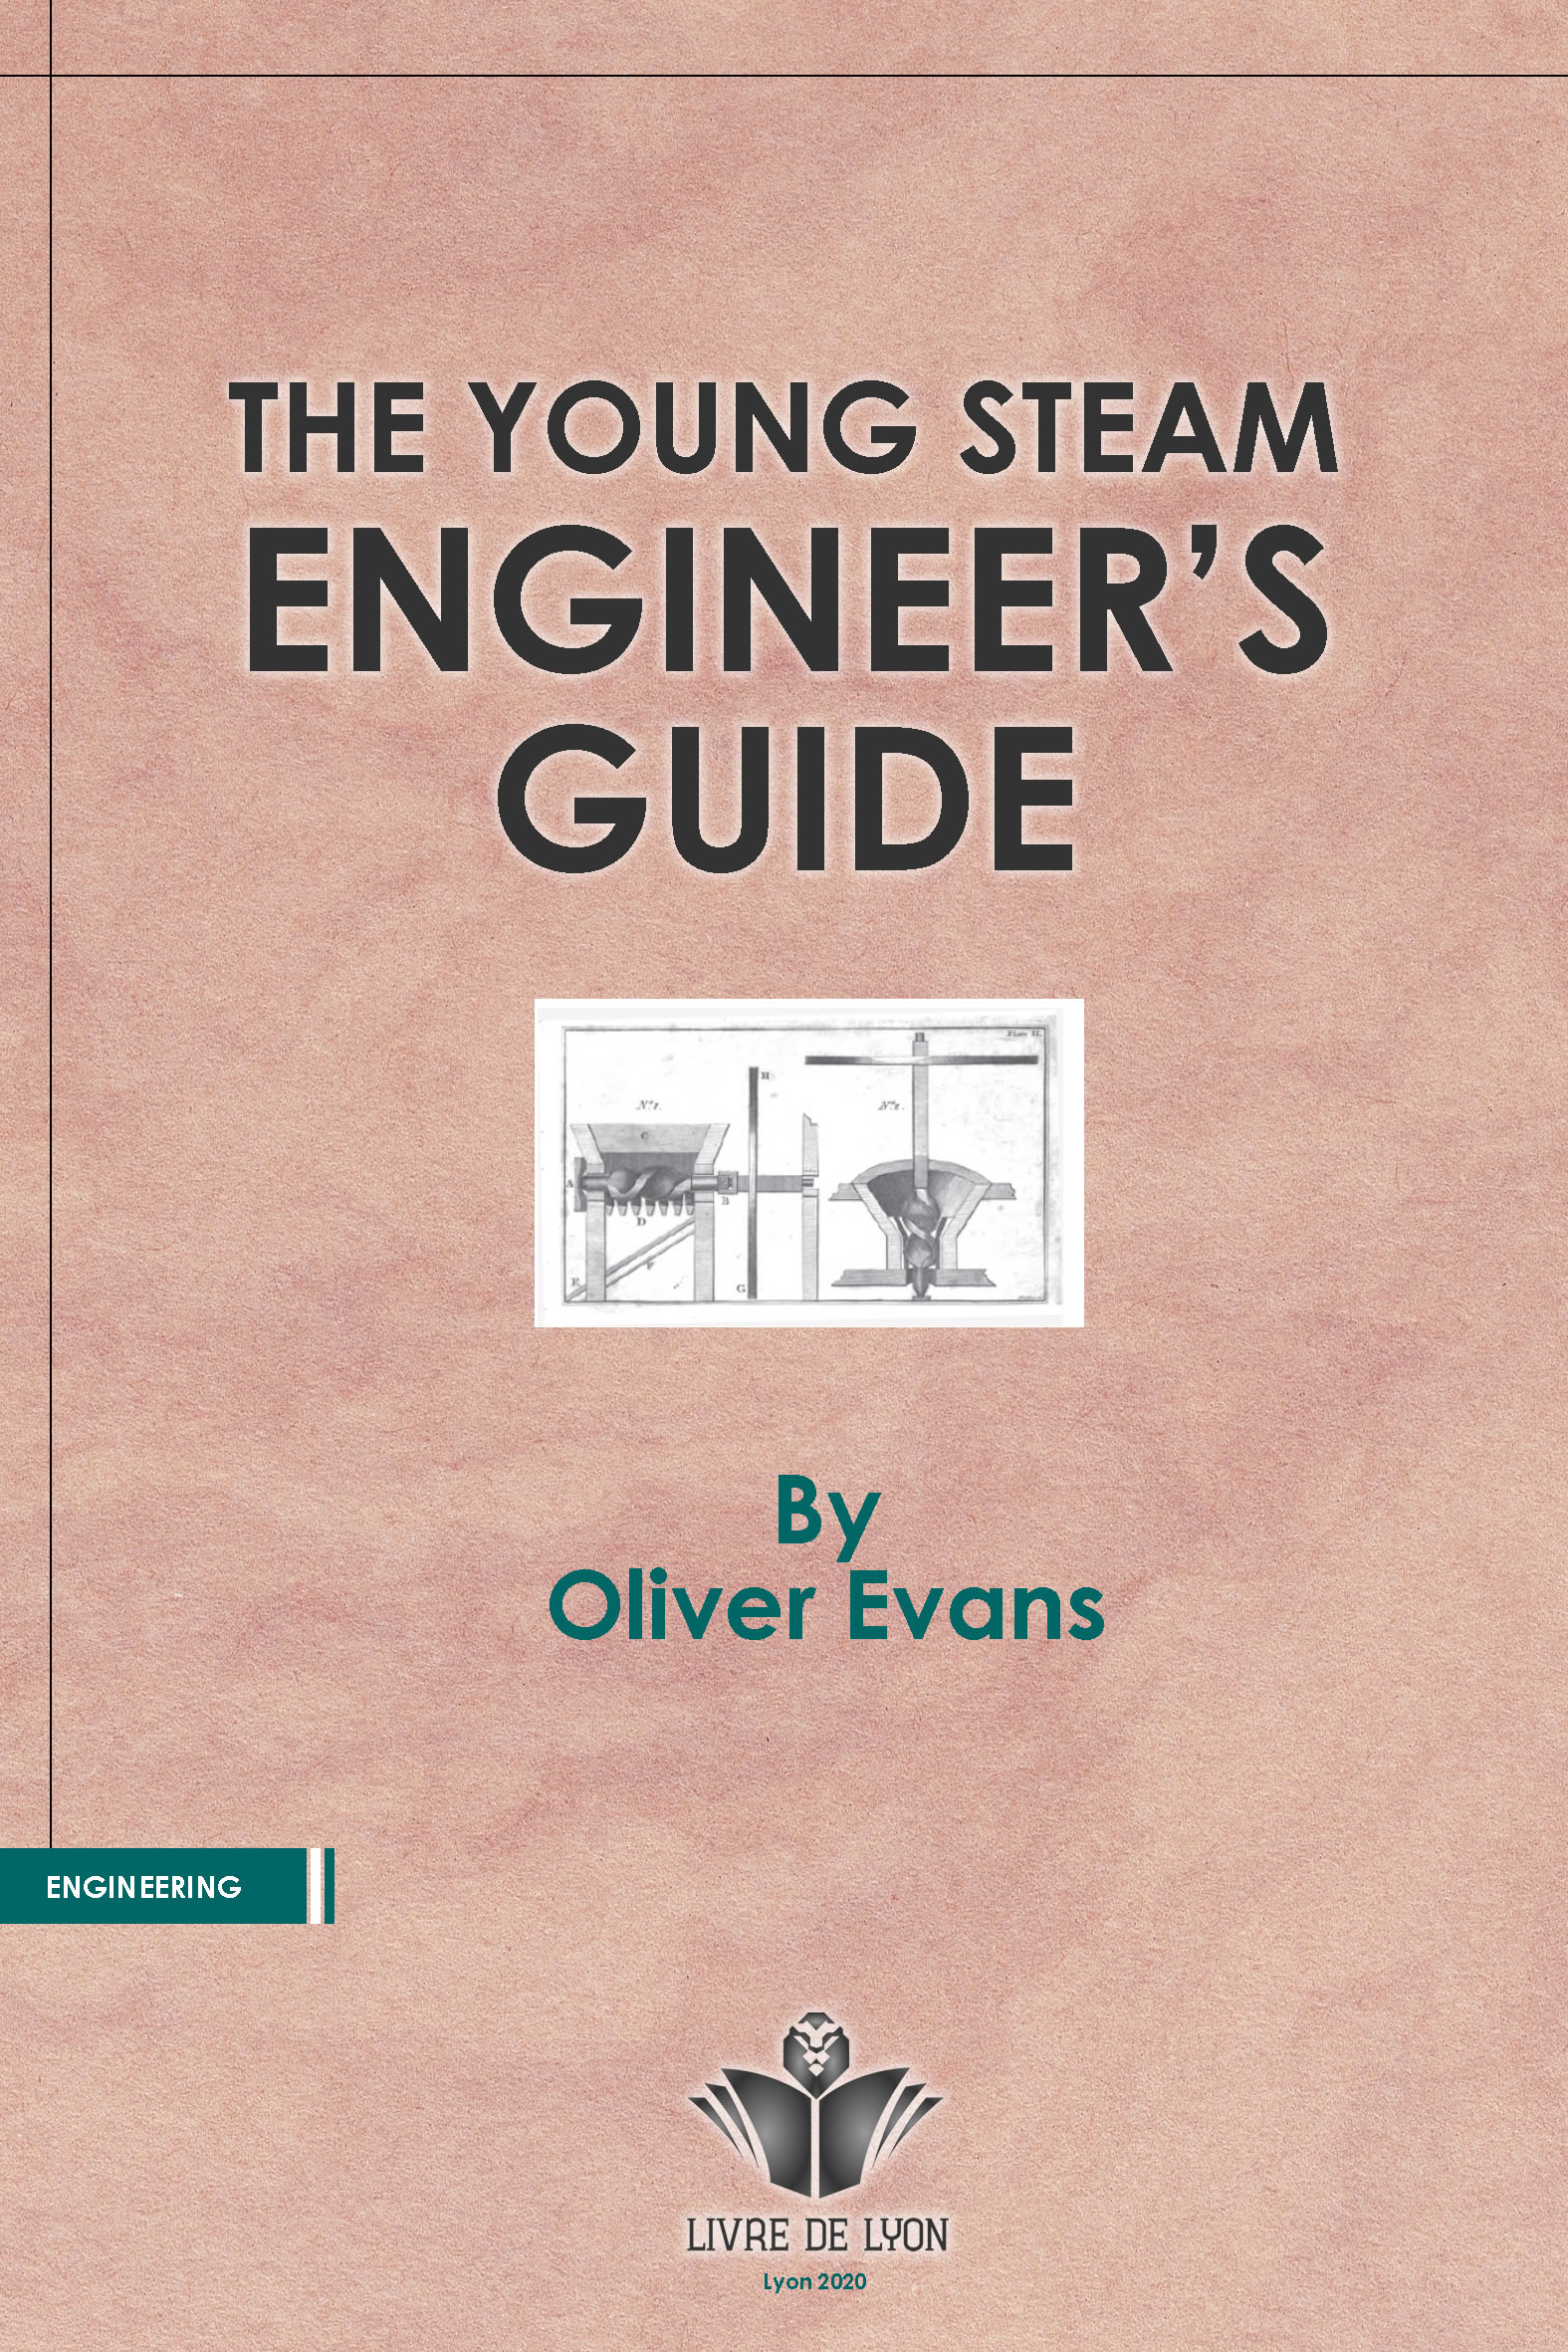 The Abortion of the Young Steam Engineer's Guide